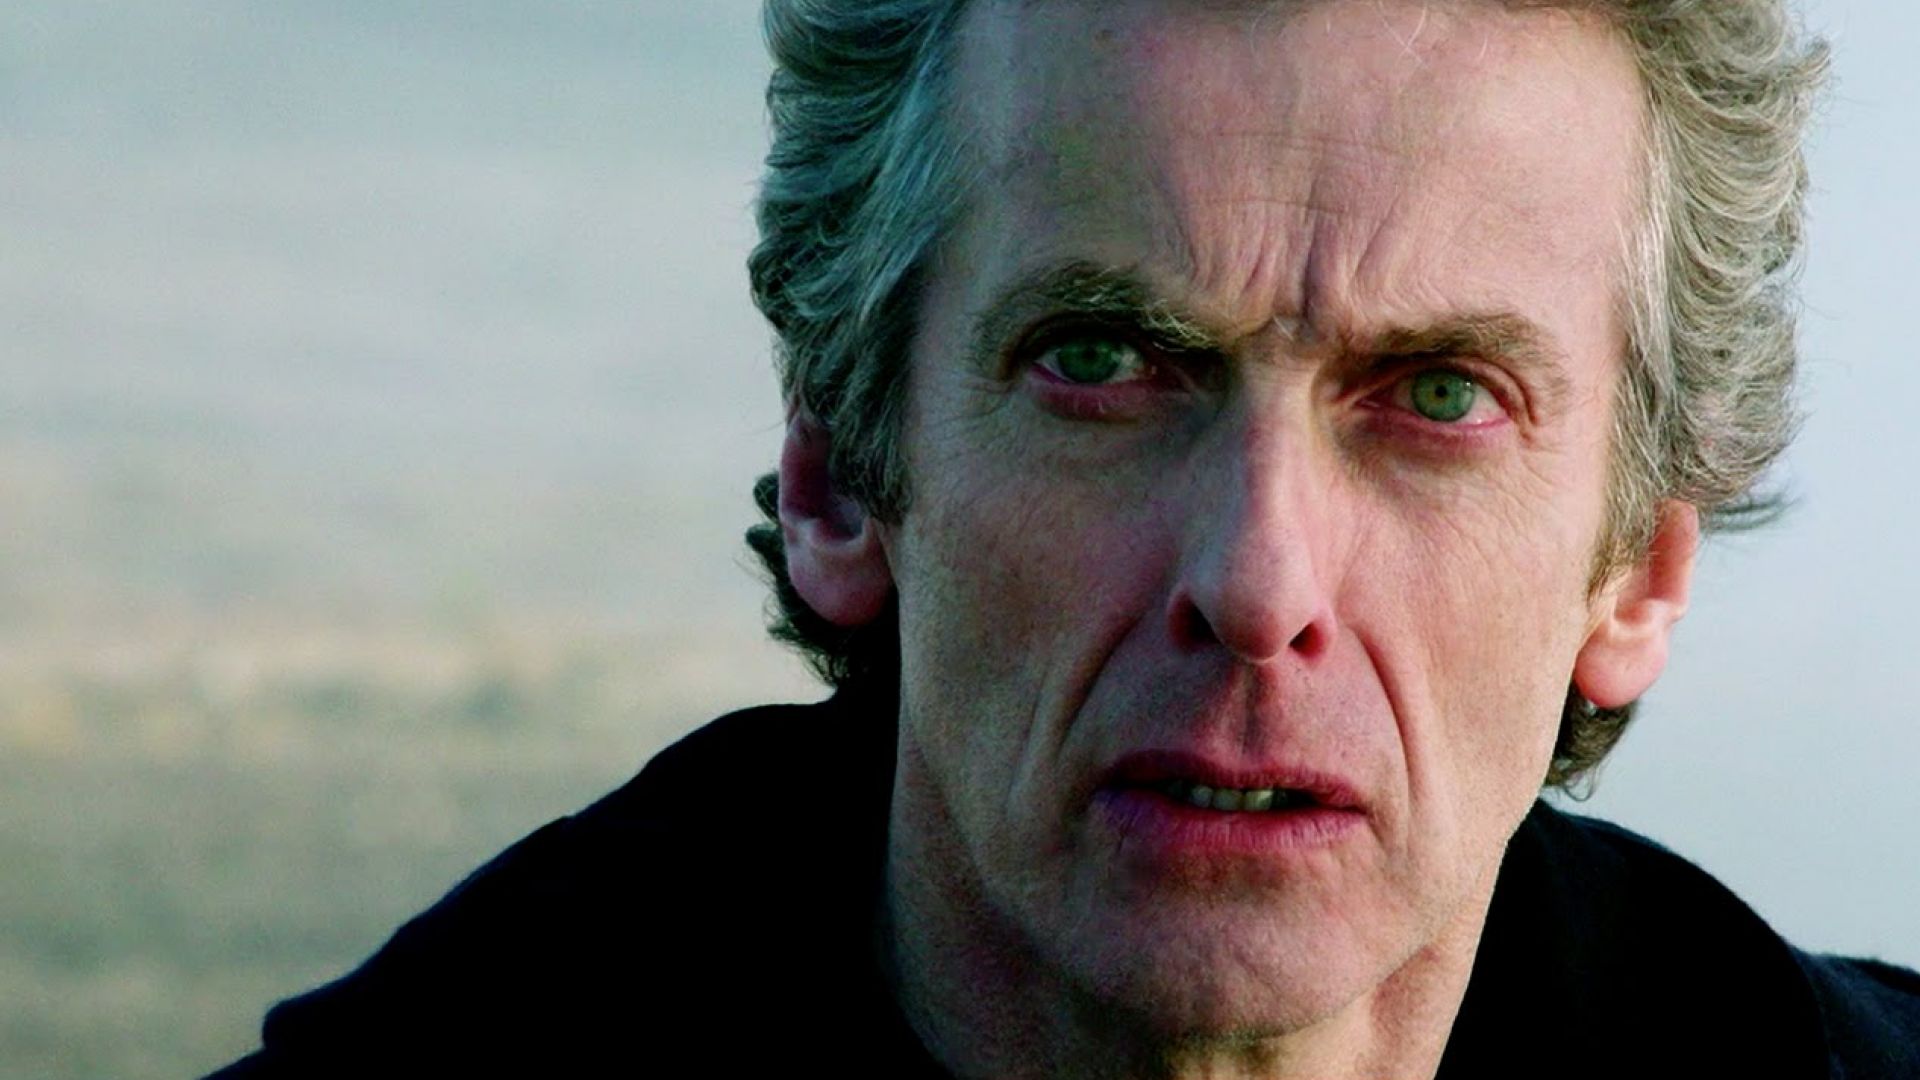 Cinematic trailer for 'Doctor Who' Season 9 lands. Coming Se